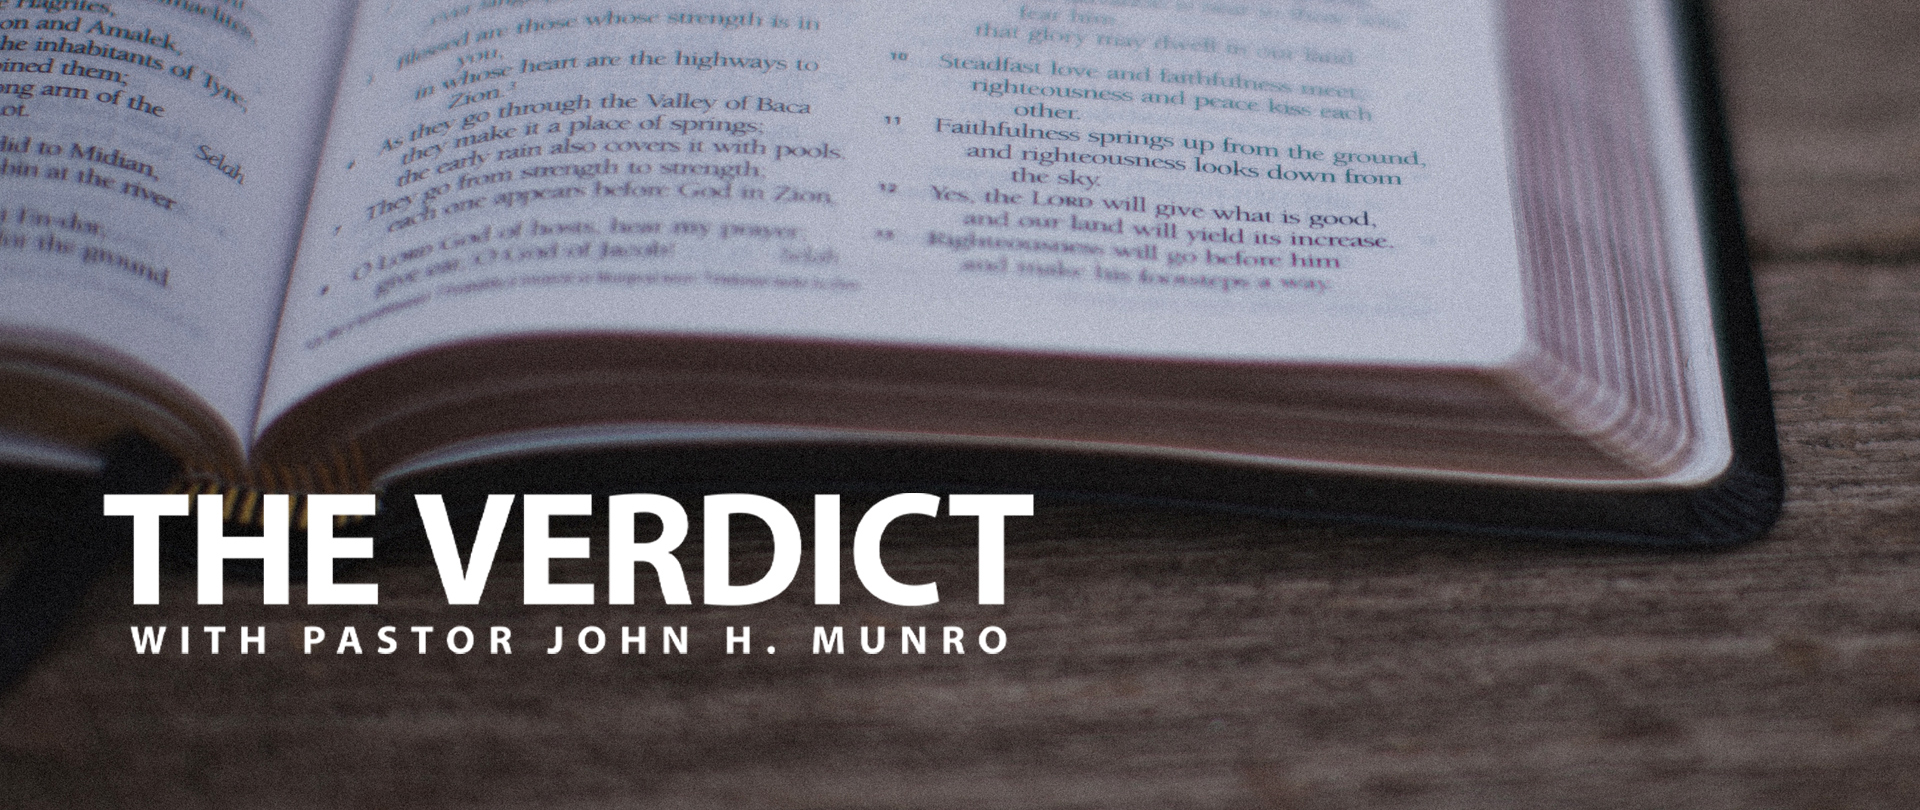 New Website for The Verdict
Radio & podcast ministry
Check it out at TheVerdict.org!
